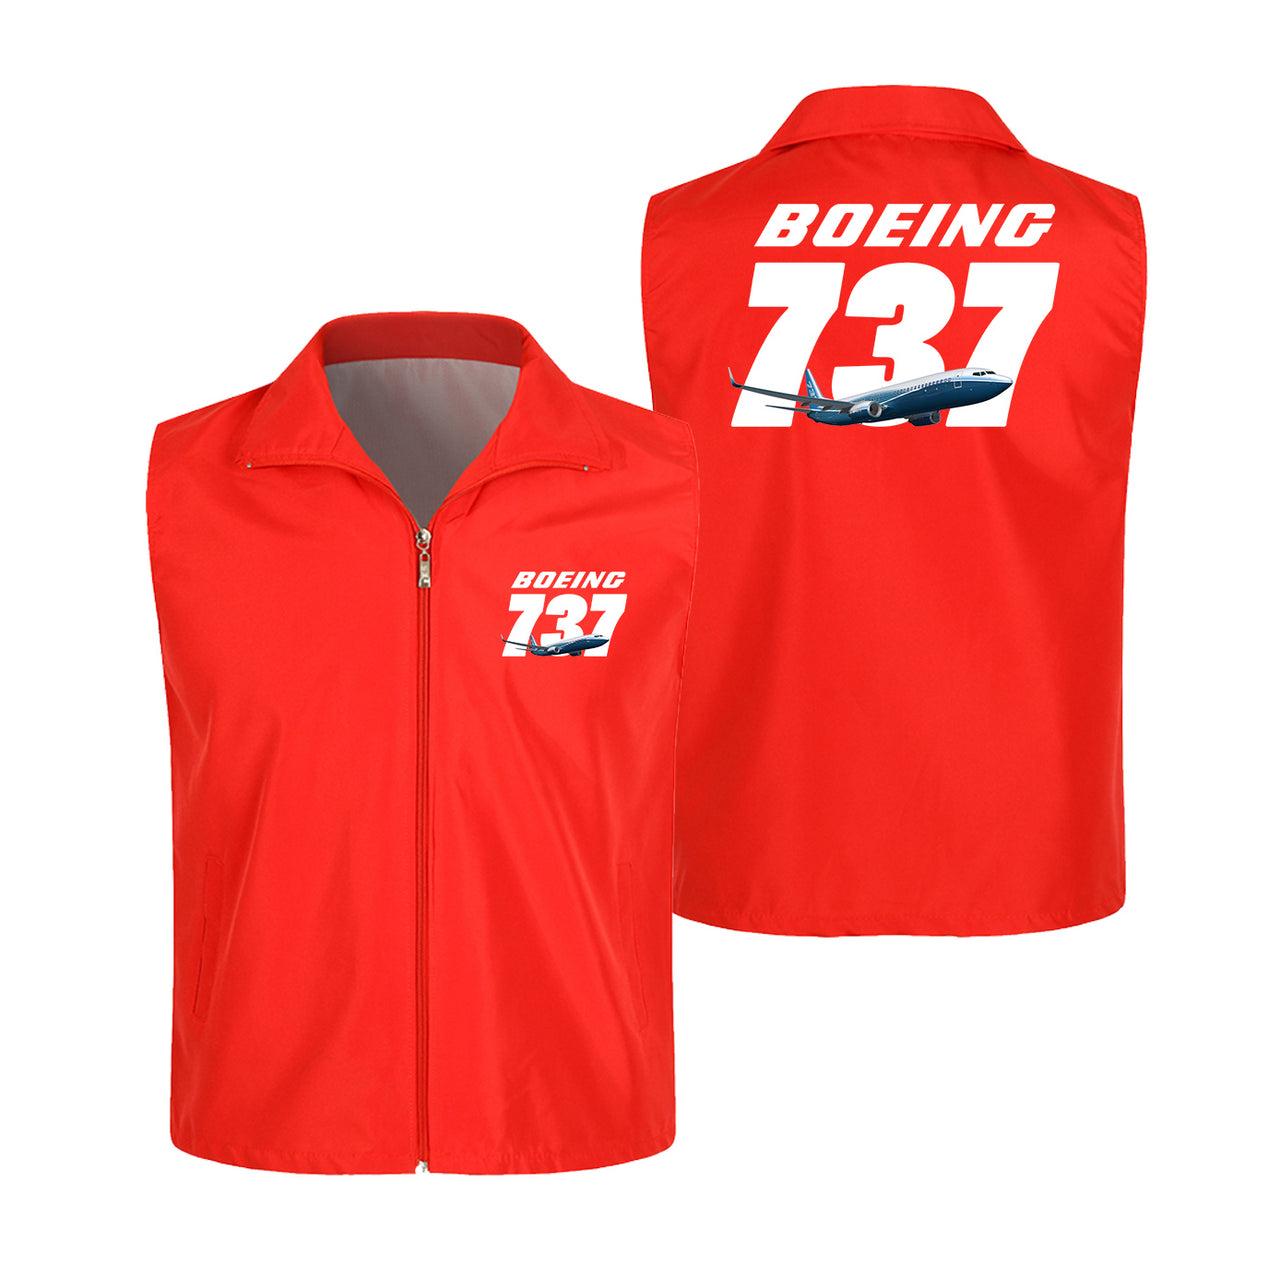 Super Boeing 737+Text Designed Thin Style Vests